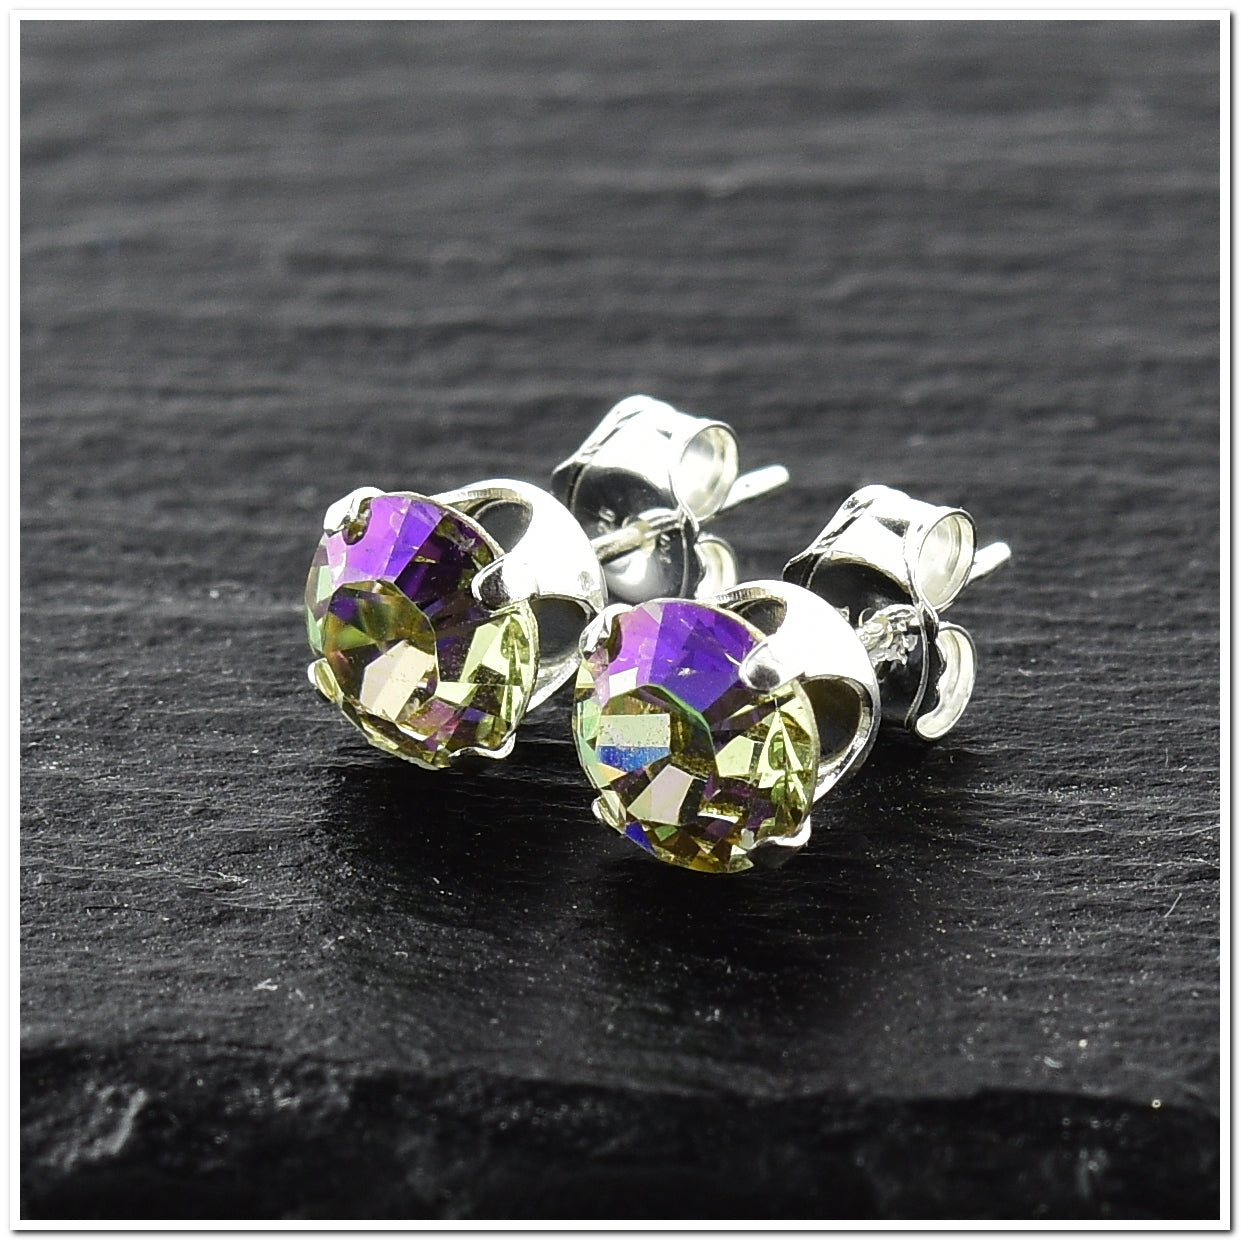 pewterhooter® Women's Classic Collection 925 Sterling silver earrings with sparkling Luminous Green crystals, packaged in a gift box for any occasion.